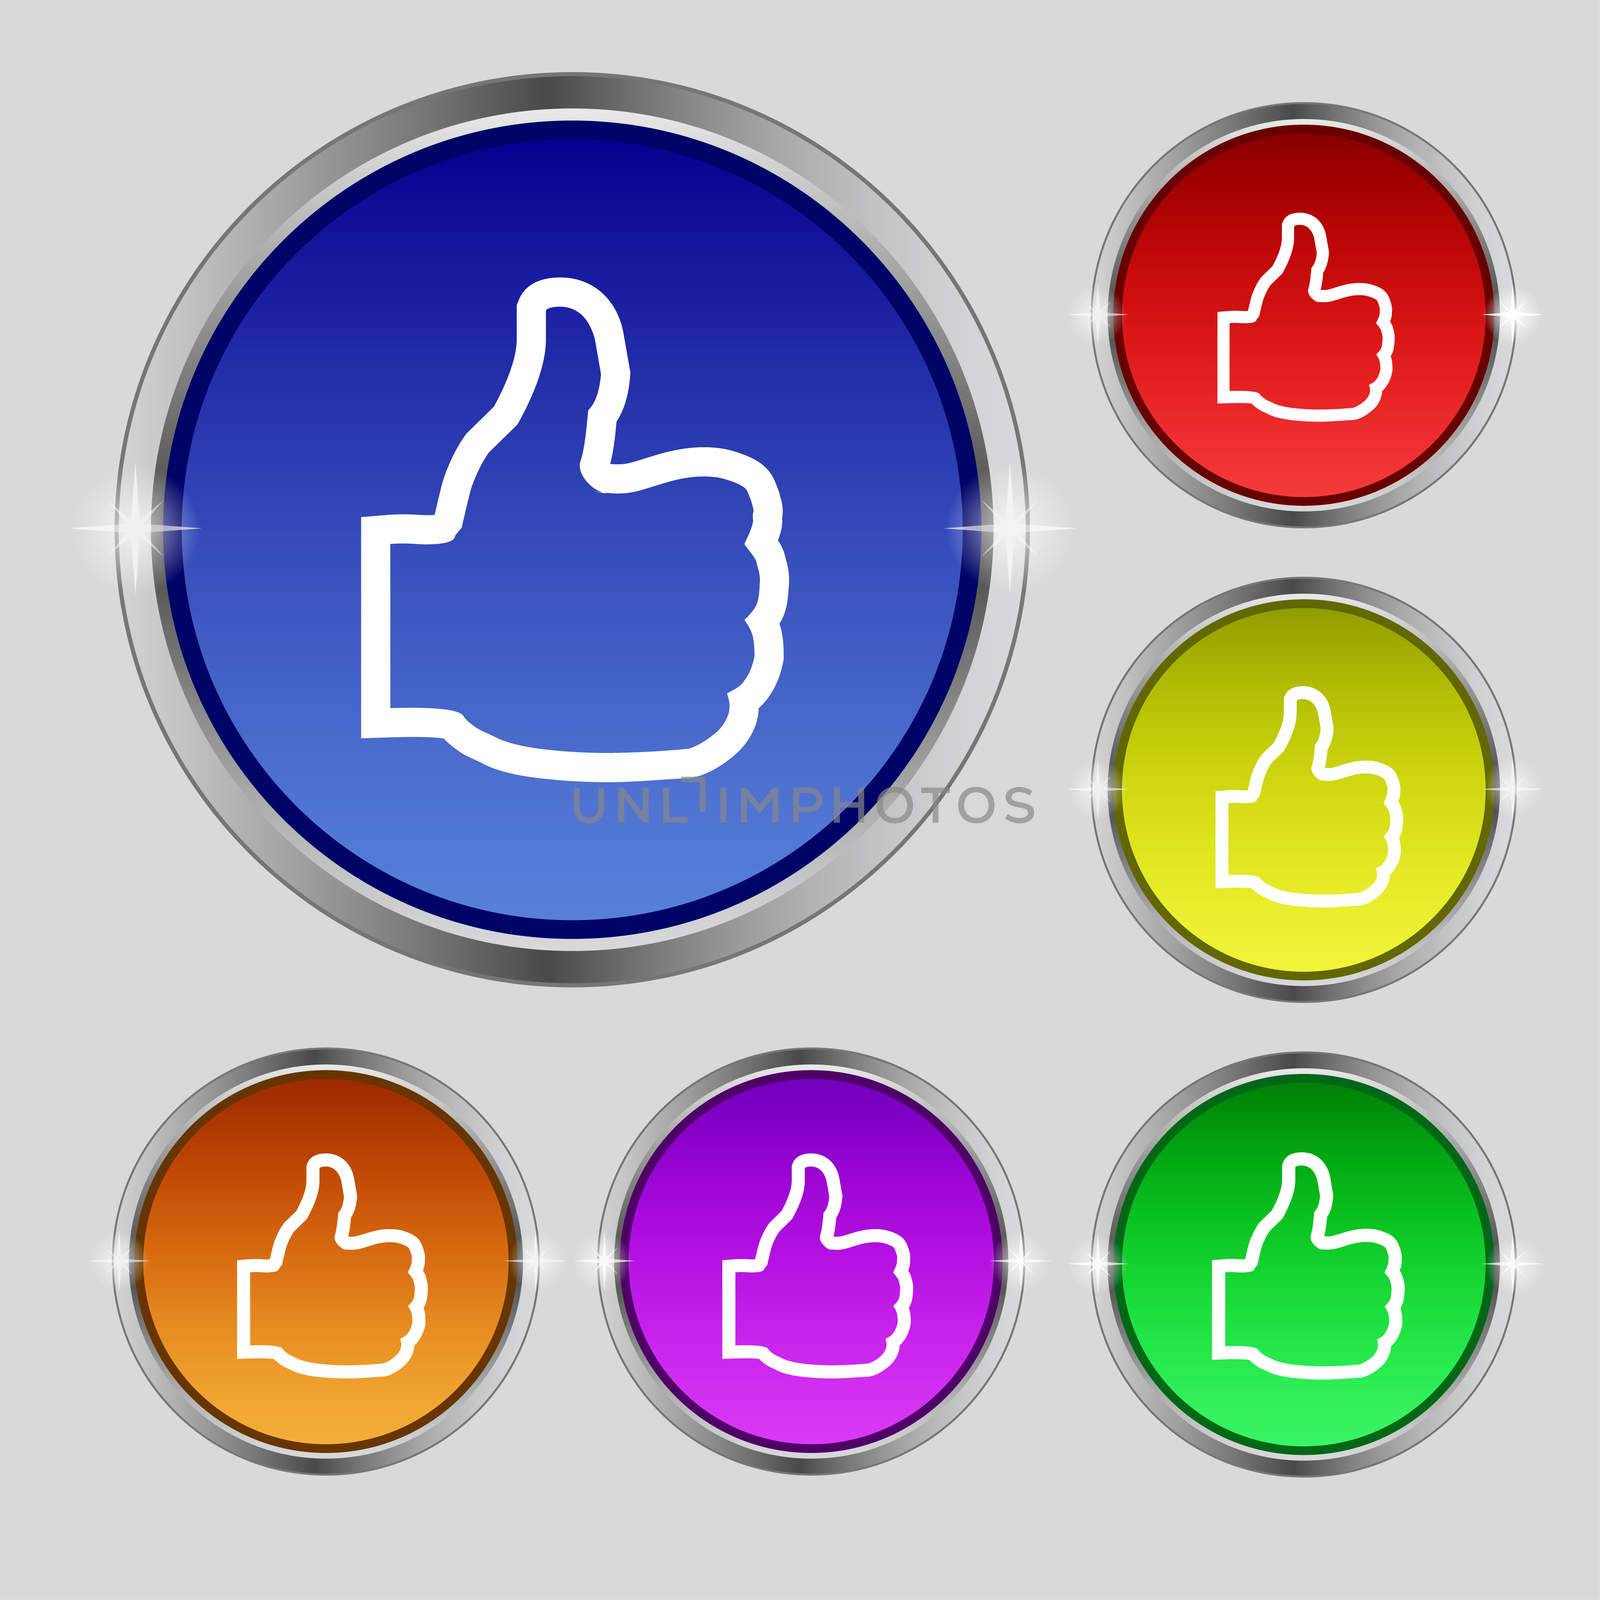 Like icon sign. Round symbol on bright colourful buttons. illustration